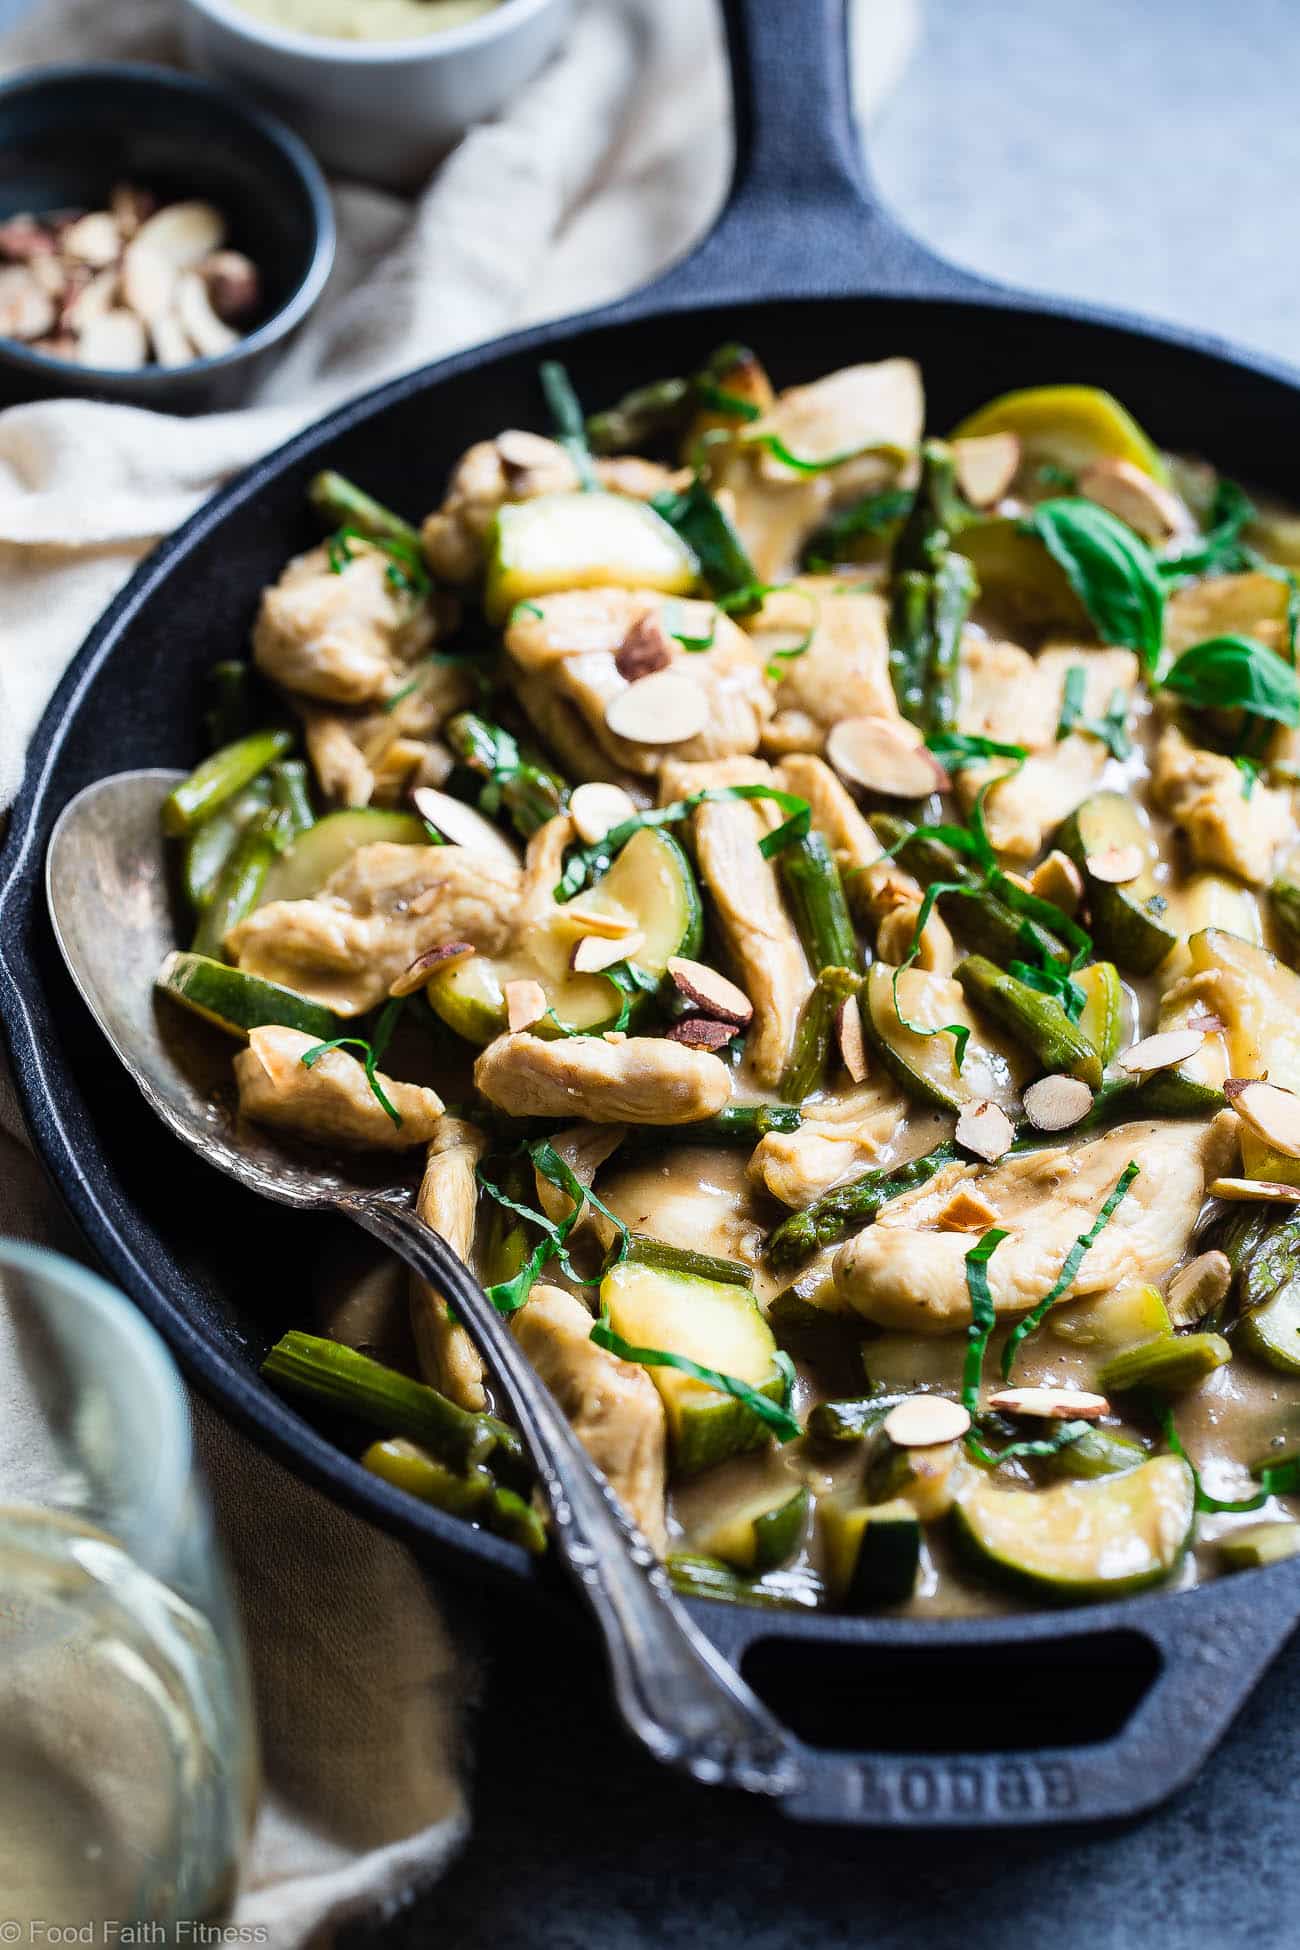 Easy Honey Mustard Chicken Skillet -  This paleo friendly chicken skillet is quick, easy and healthy! It's kid-friendly, 30 minute meal that makes great leftovers and perfect for busy weeknights! | Foodfaithfitness.com | @FoodFaithFit